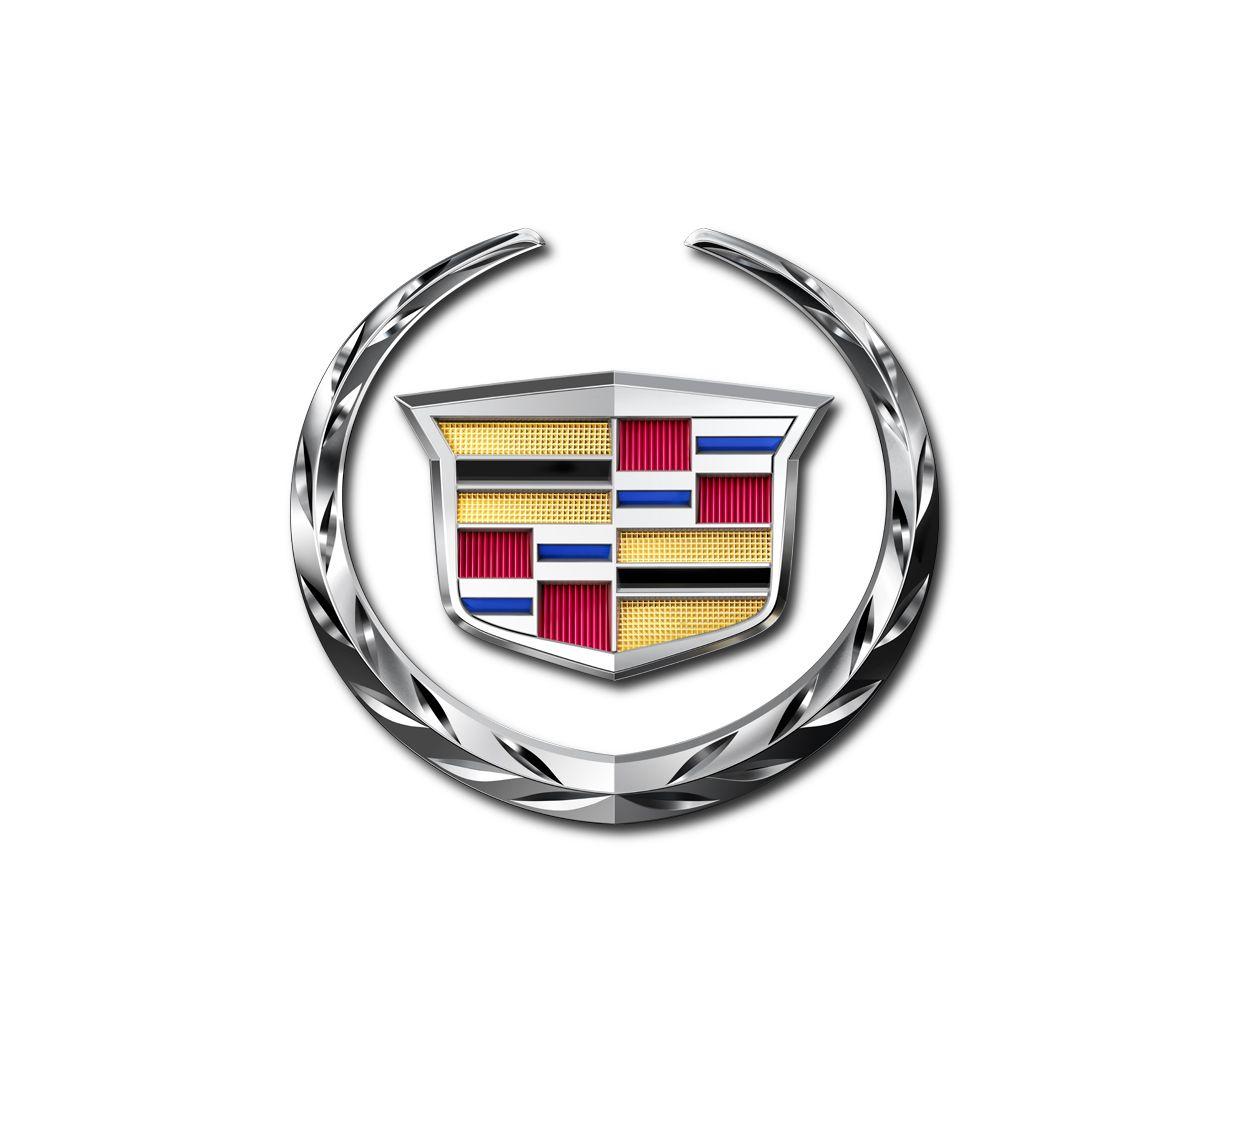 2016 New Cadillac Logo - Report: Cadillac Unveiling A New Emblem At Pebble Beach | Top Speed